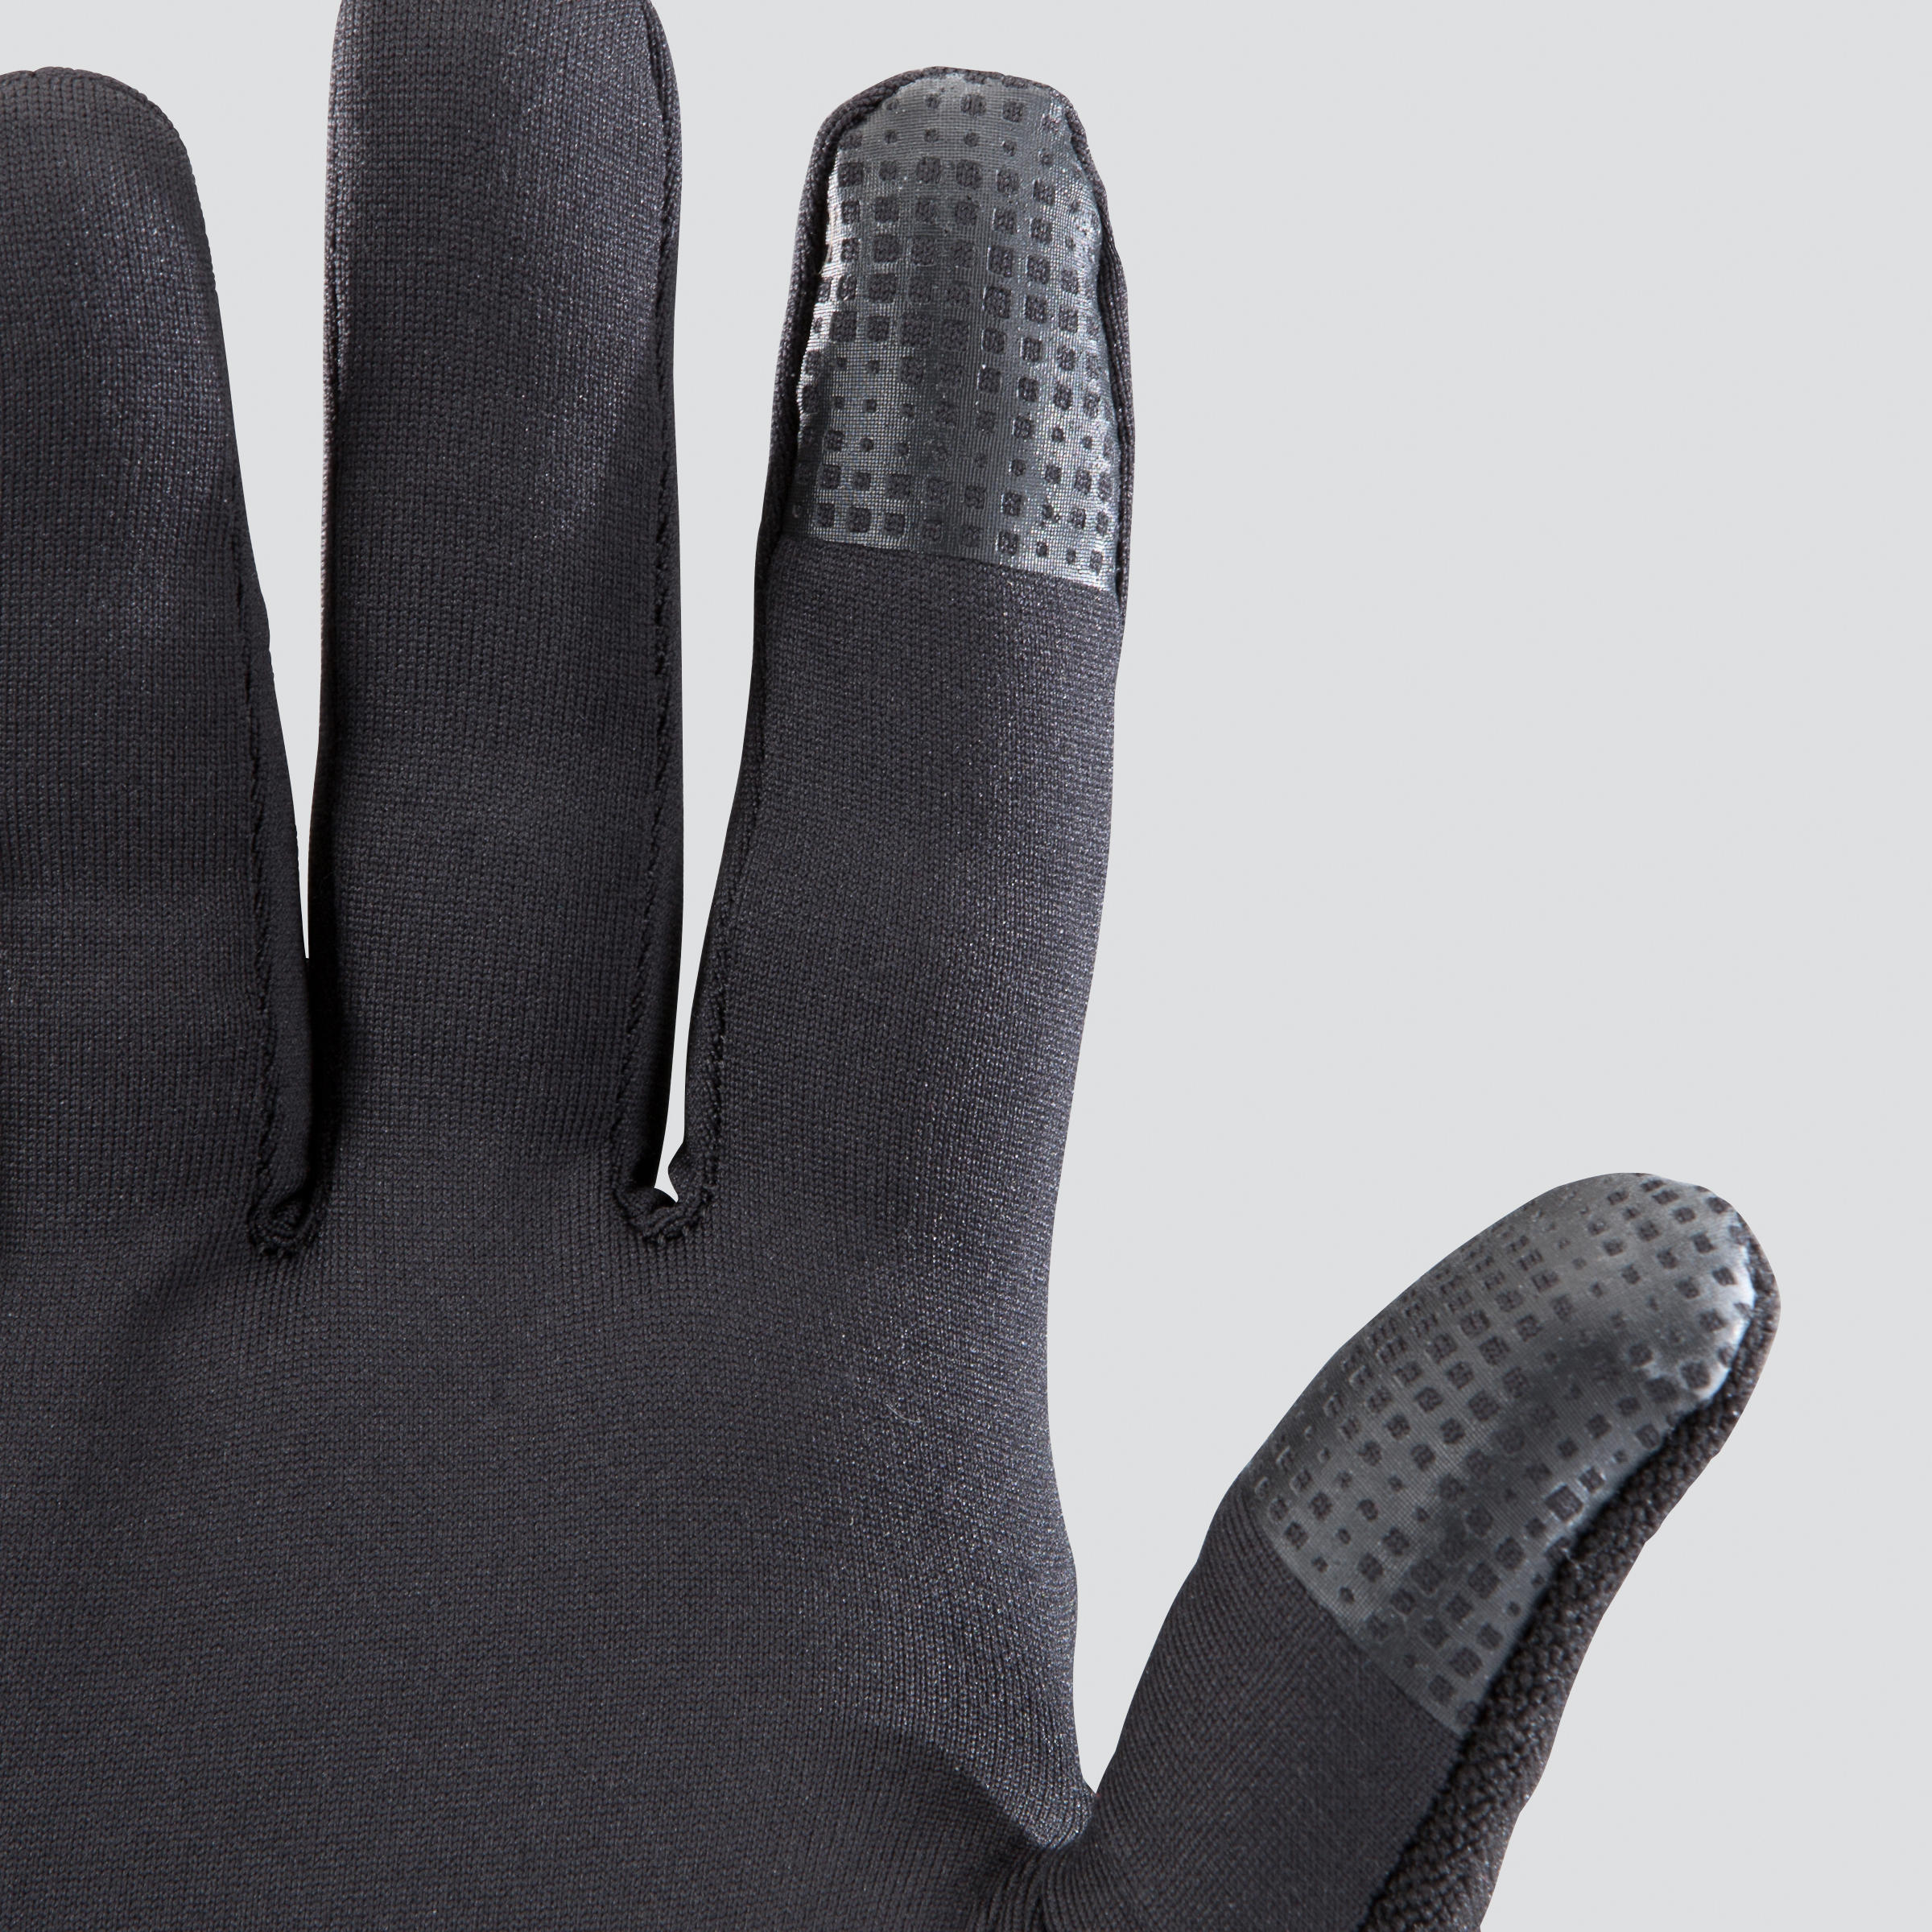 EVOLUTIV BY NIGHT GLOVES BLACK additional mittent cover 5/12